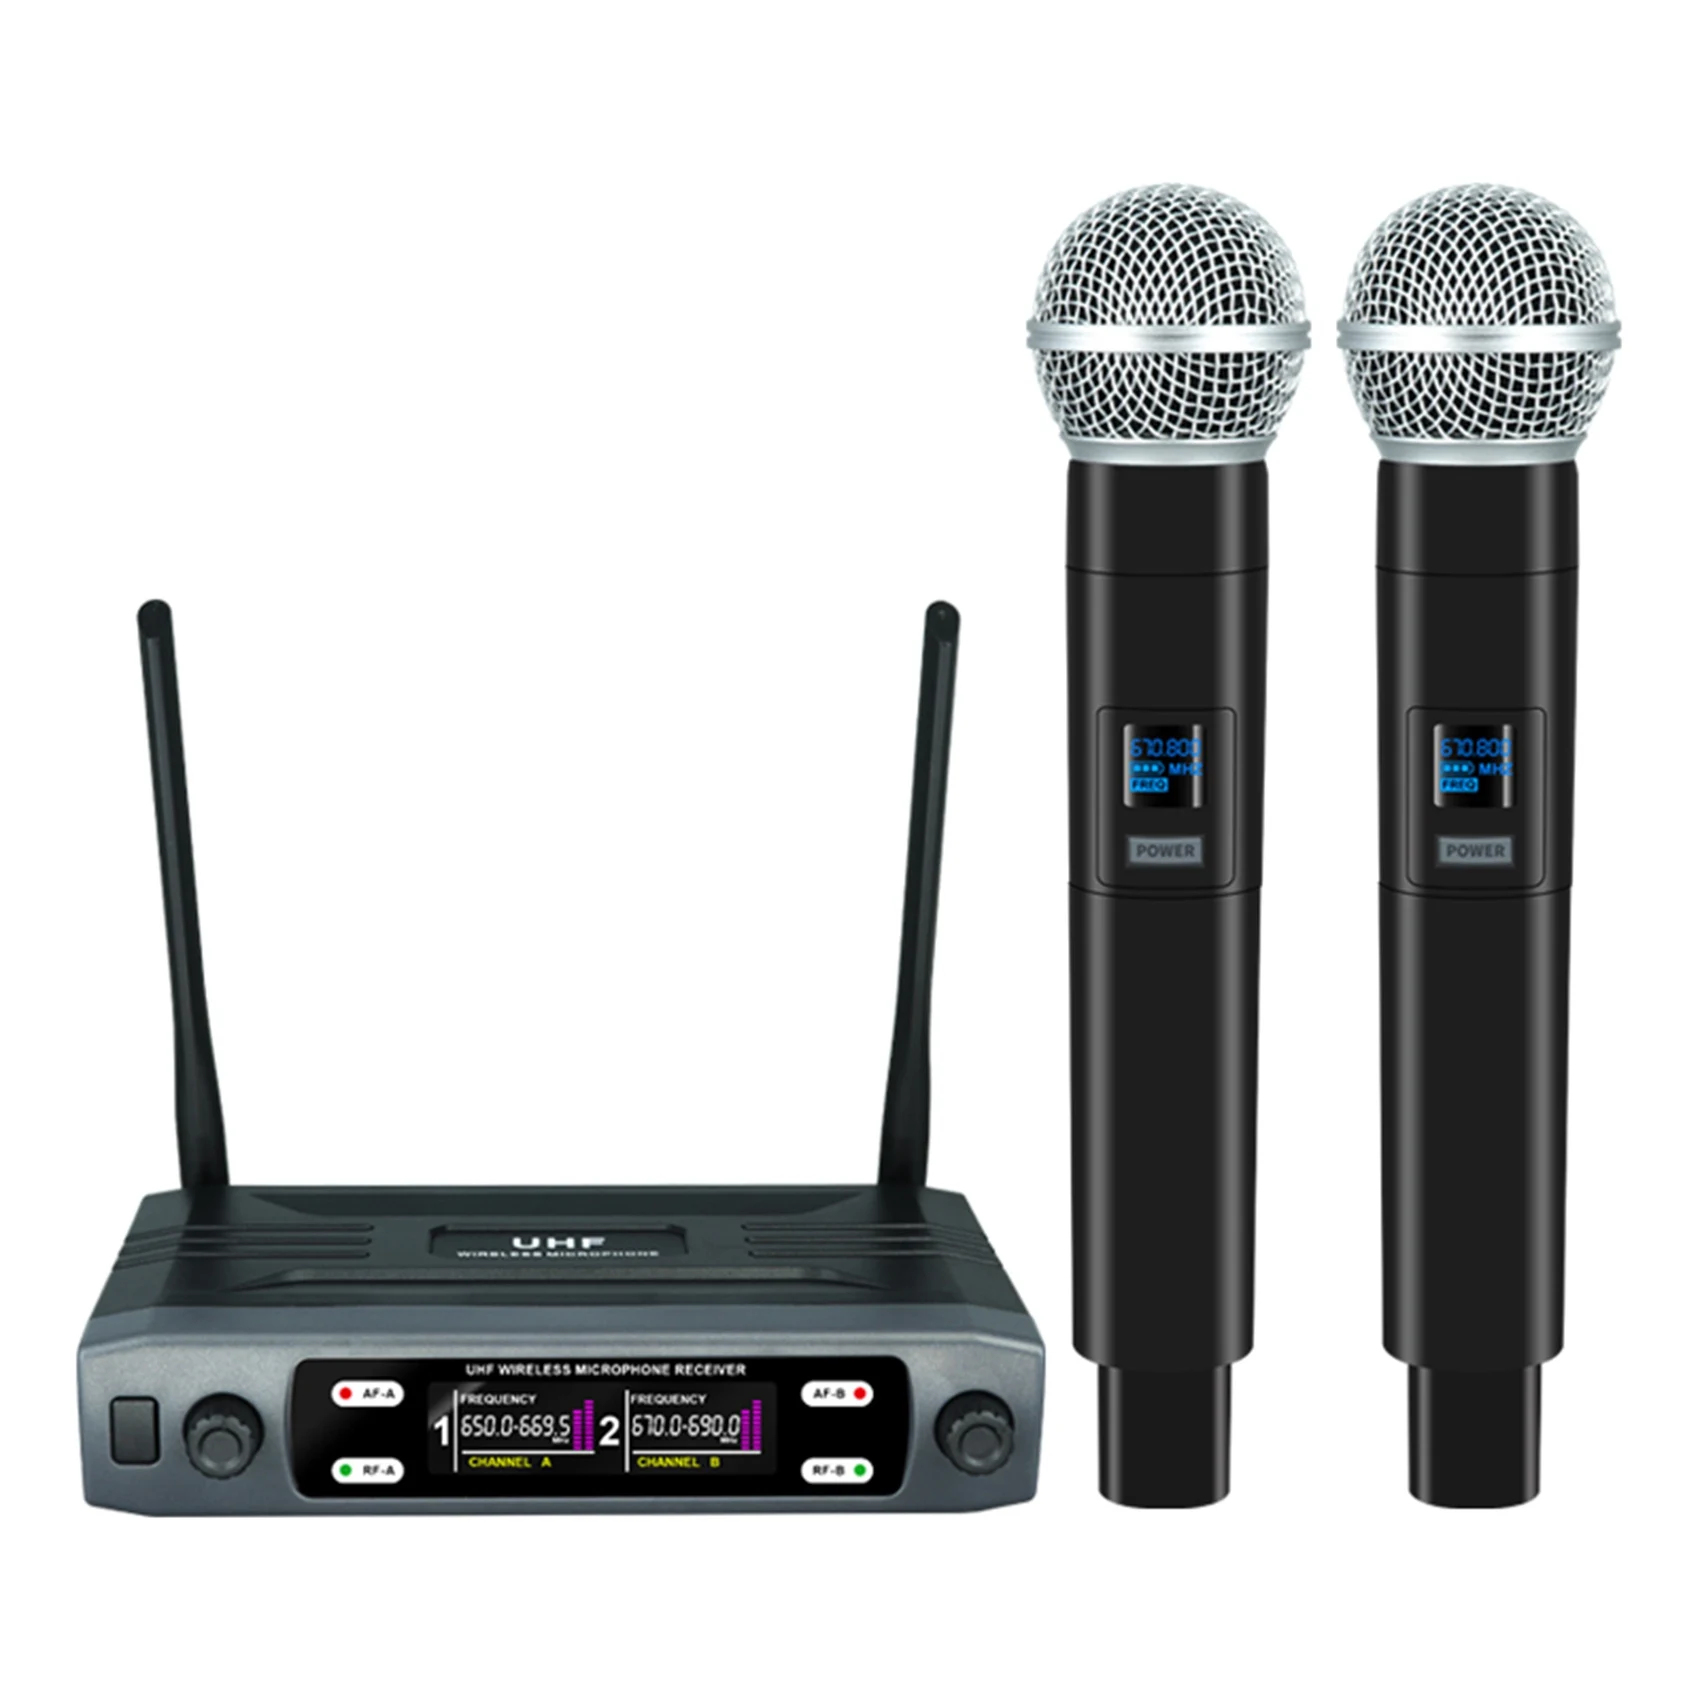 

Wireless Microphone 1 Drag 2 Handheld Microphone Suitable for Outdoor Audio Party Karaoke Conference Performance US Plug